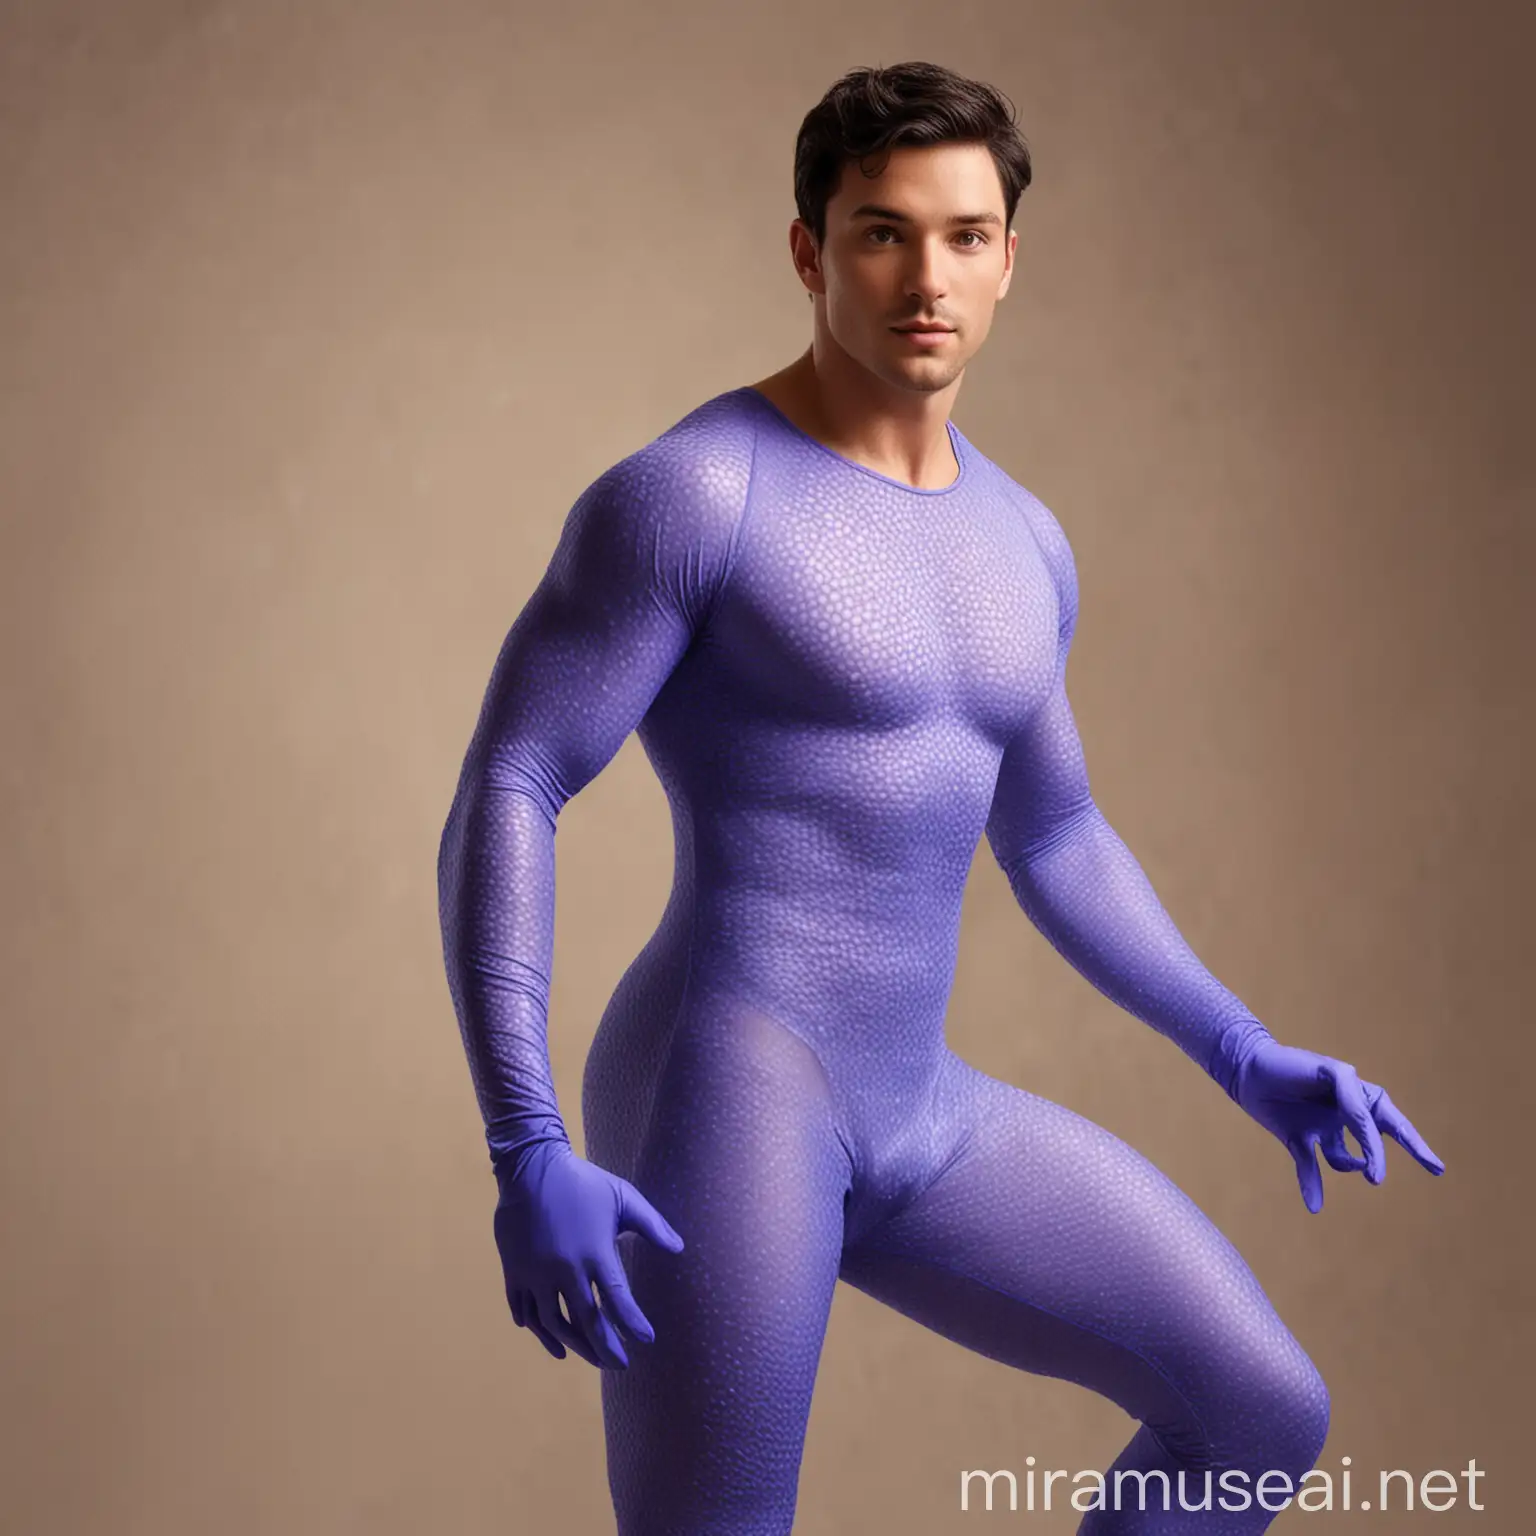 Handsome fit 27 year old American man, with short black hair; hazel eyes, pointed nose; wearing bright periwinkle hero spandex bodysuit with little honeycomb pattern; and gloves with silk shooters; swinging in silk wines. PIXAR STYLE ART.